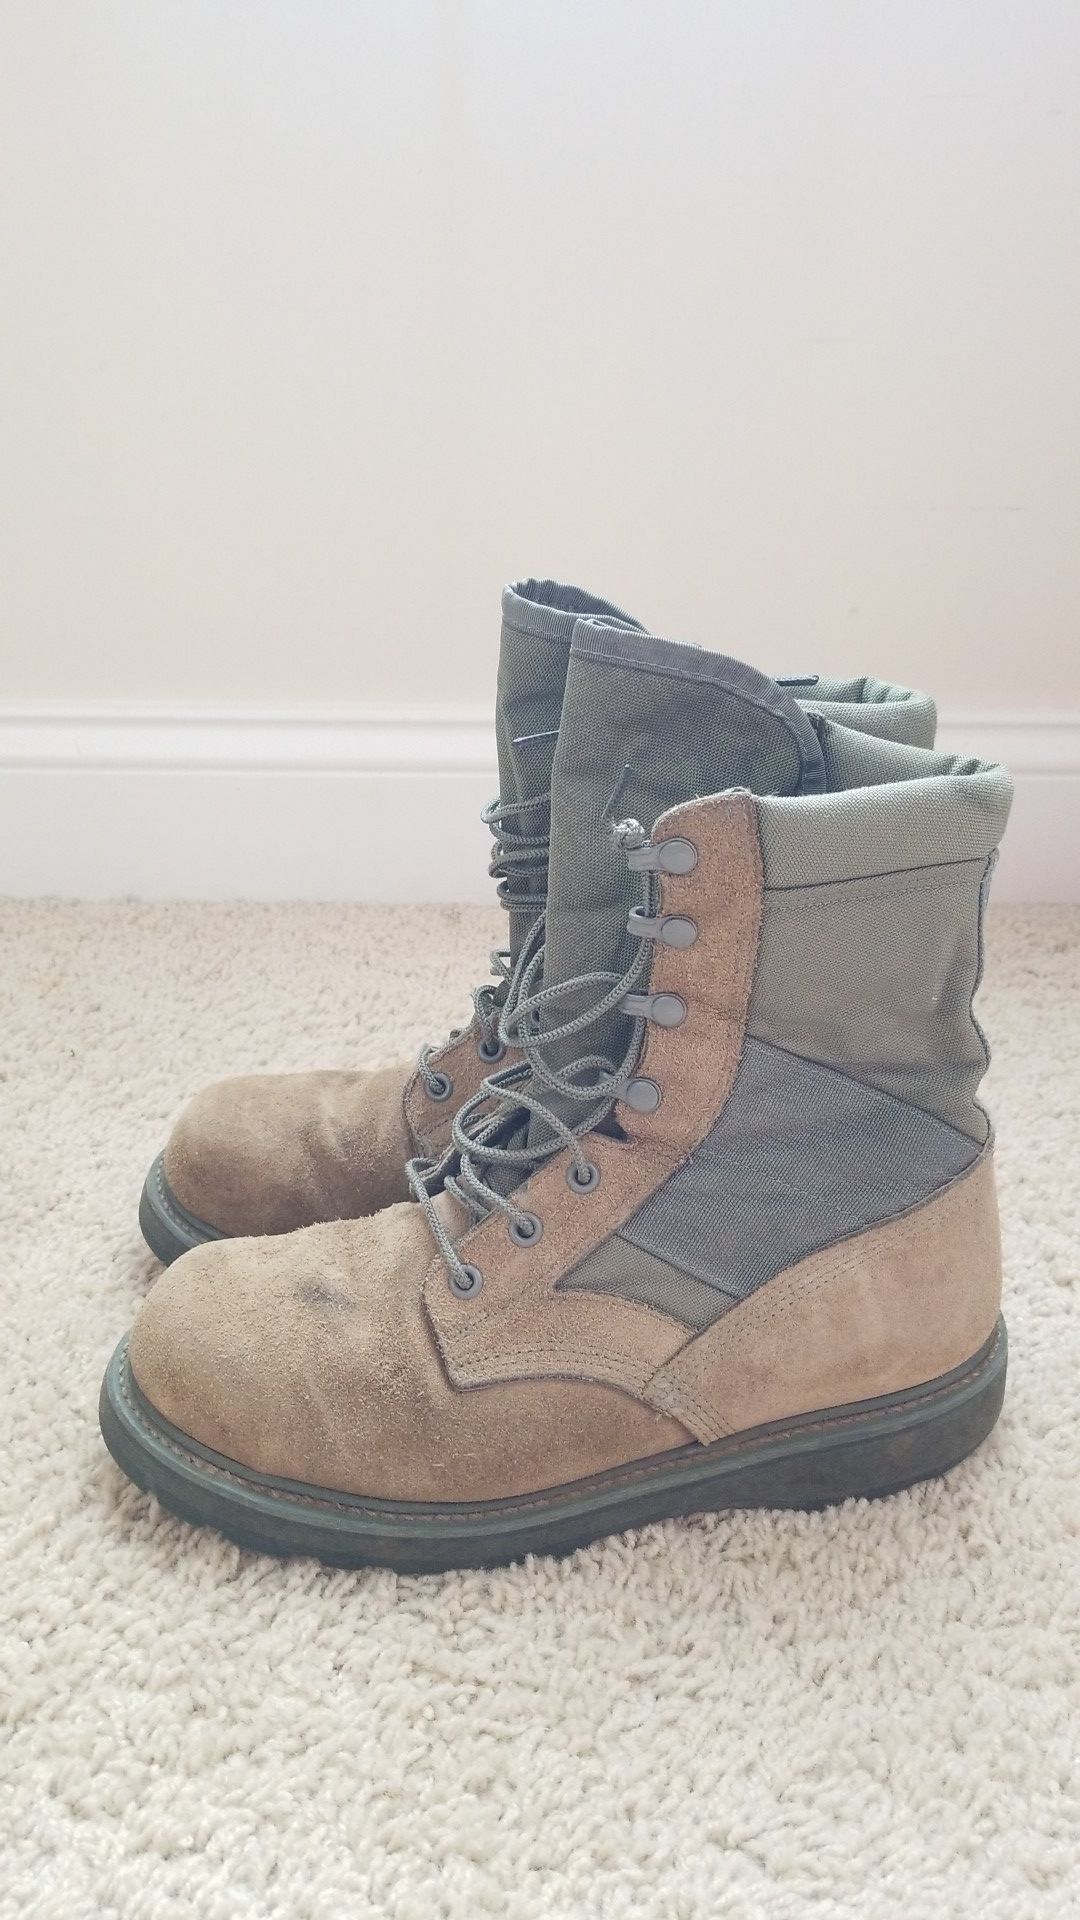 Size 8 (female wore) unisex military boot